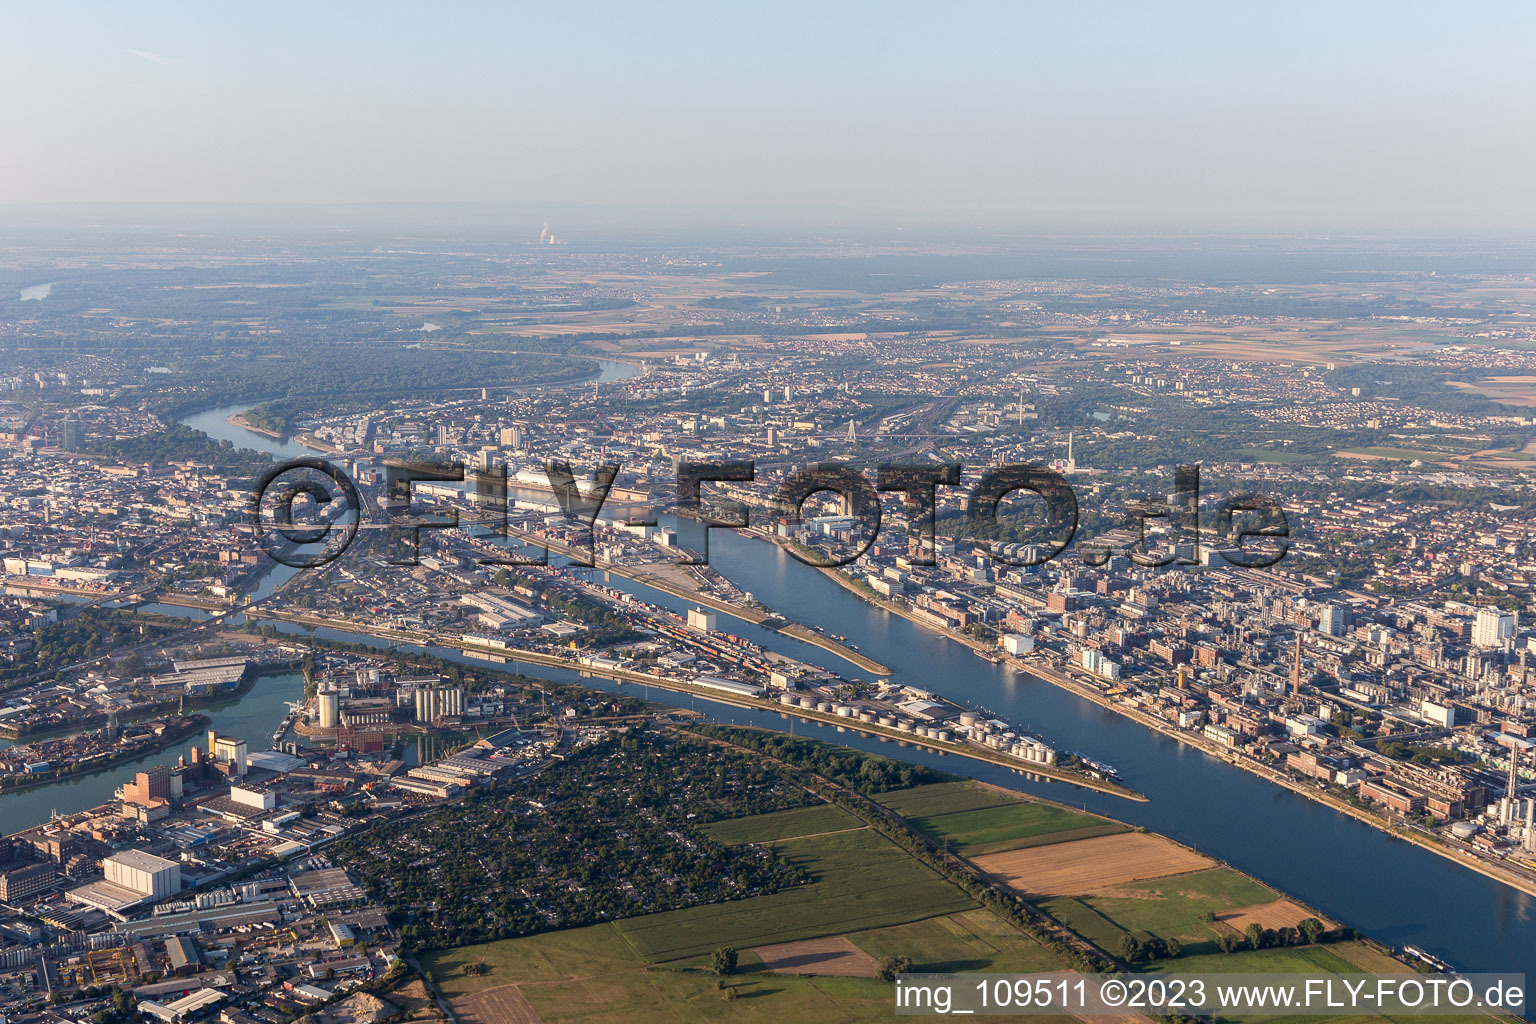 District BASF in Ludwigshafen am Rhein in the state Rhineland-Palatinate, Germany from above